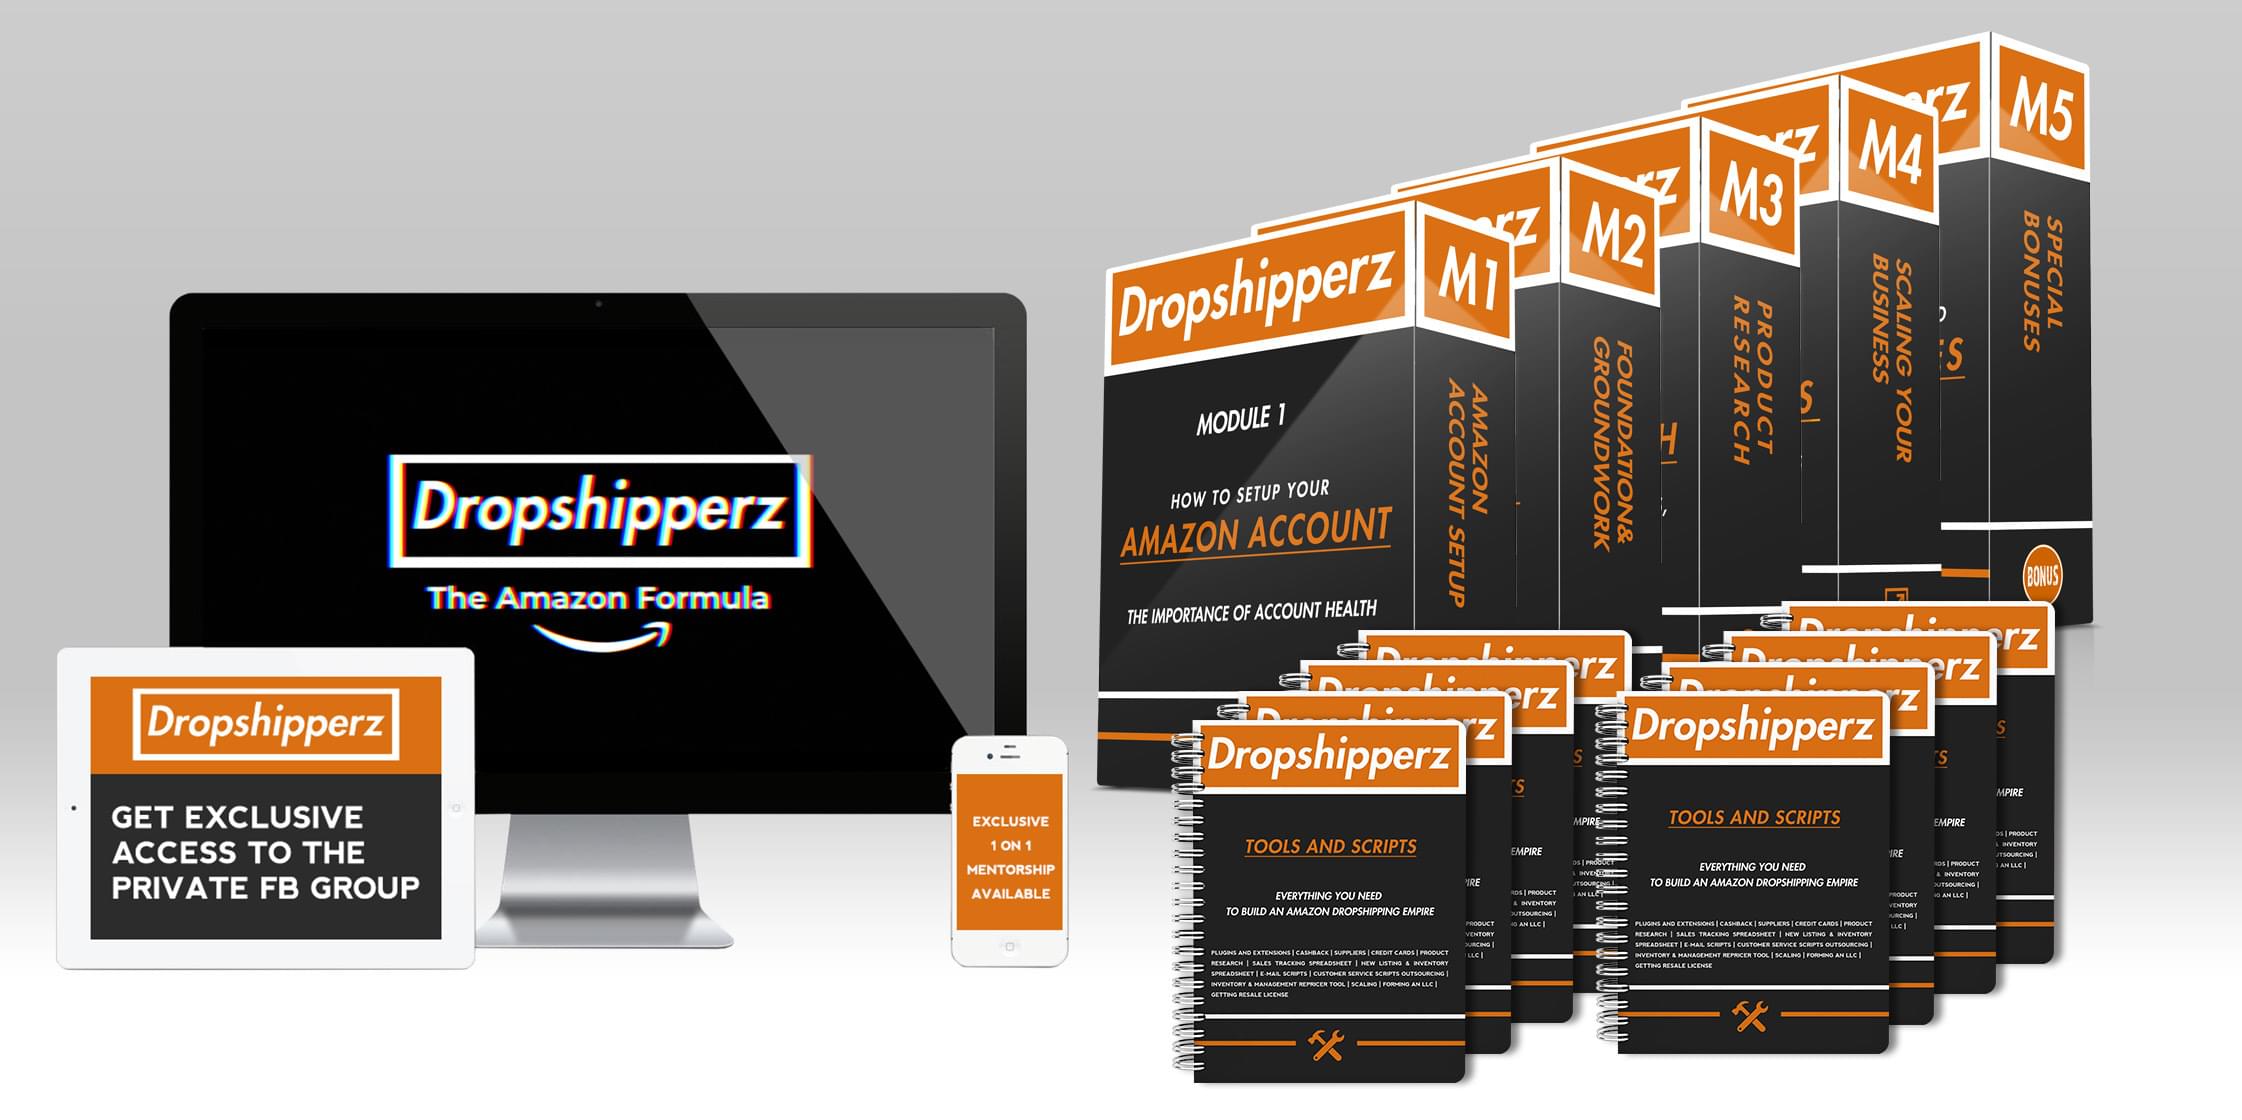 Tips to Build a Dropshipping Empire From a $25 Million Seller